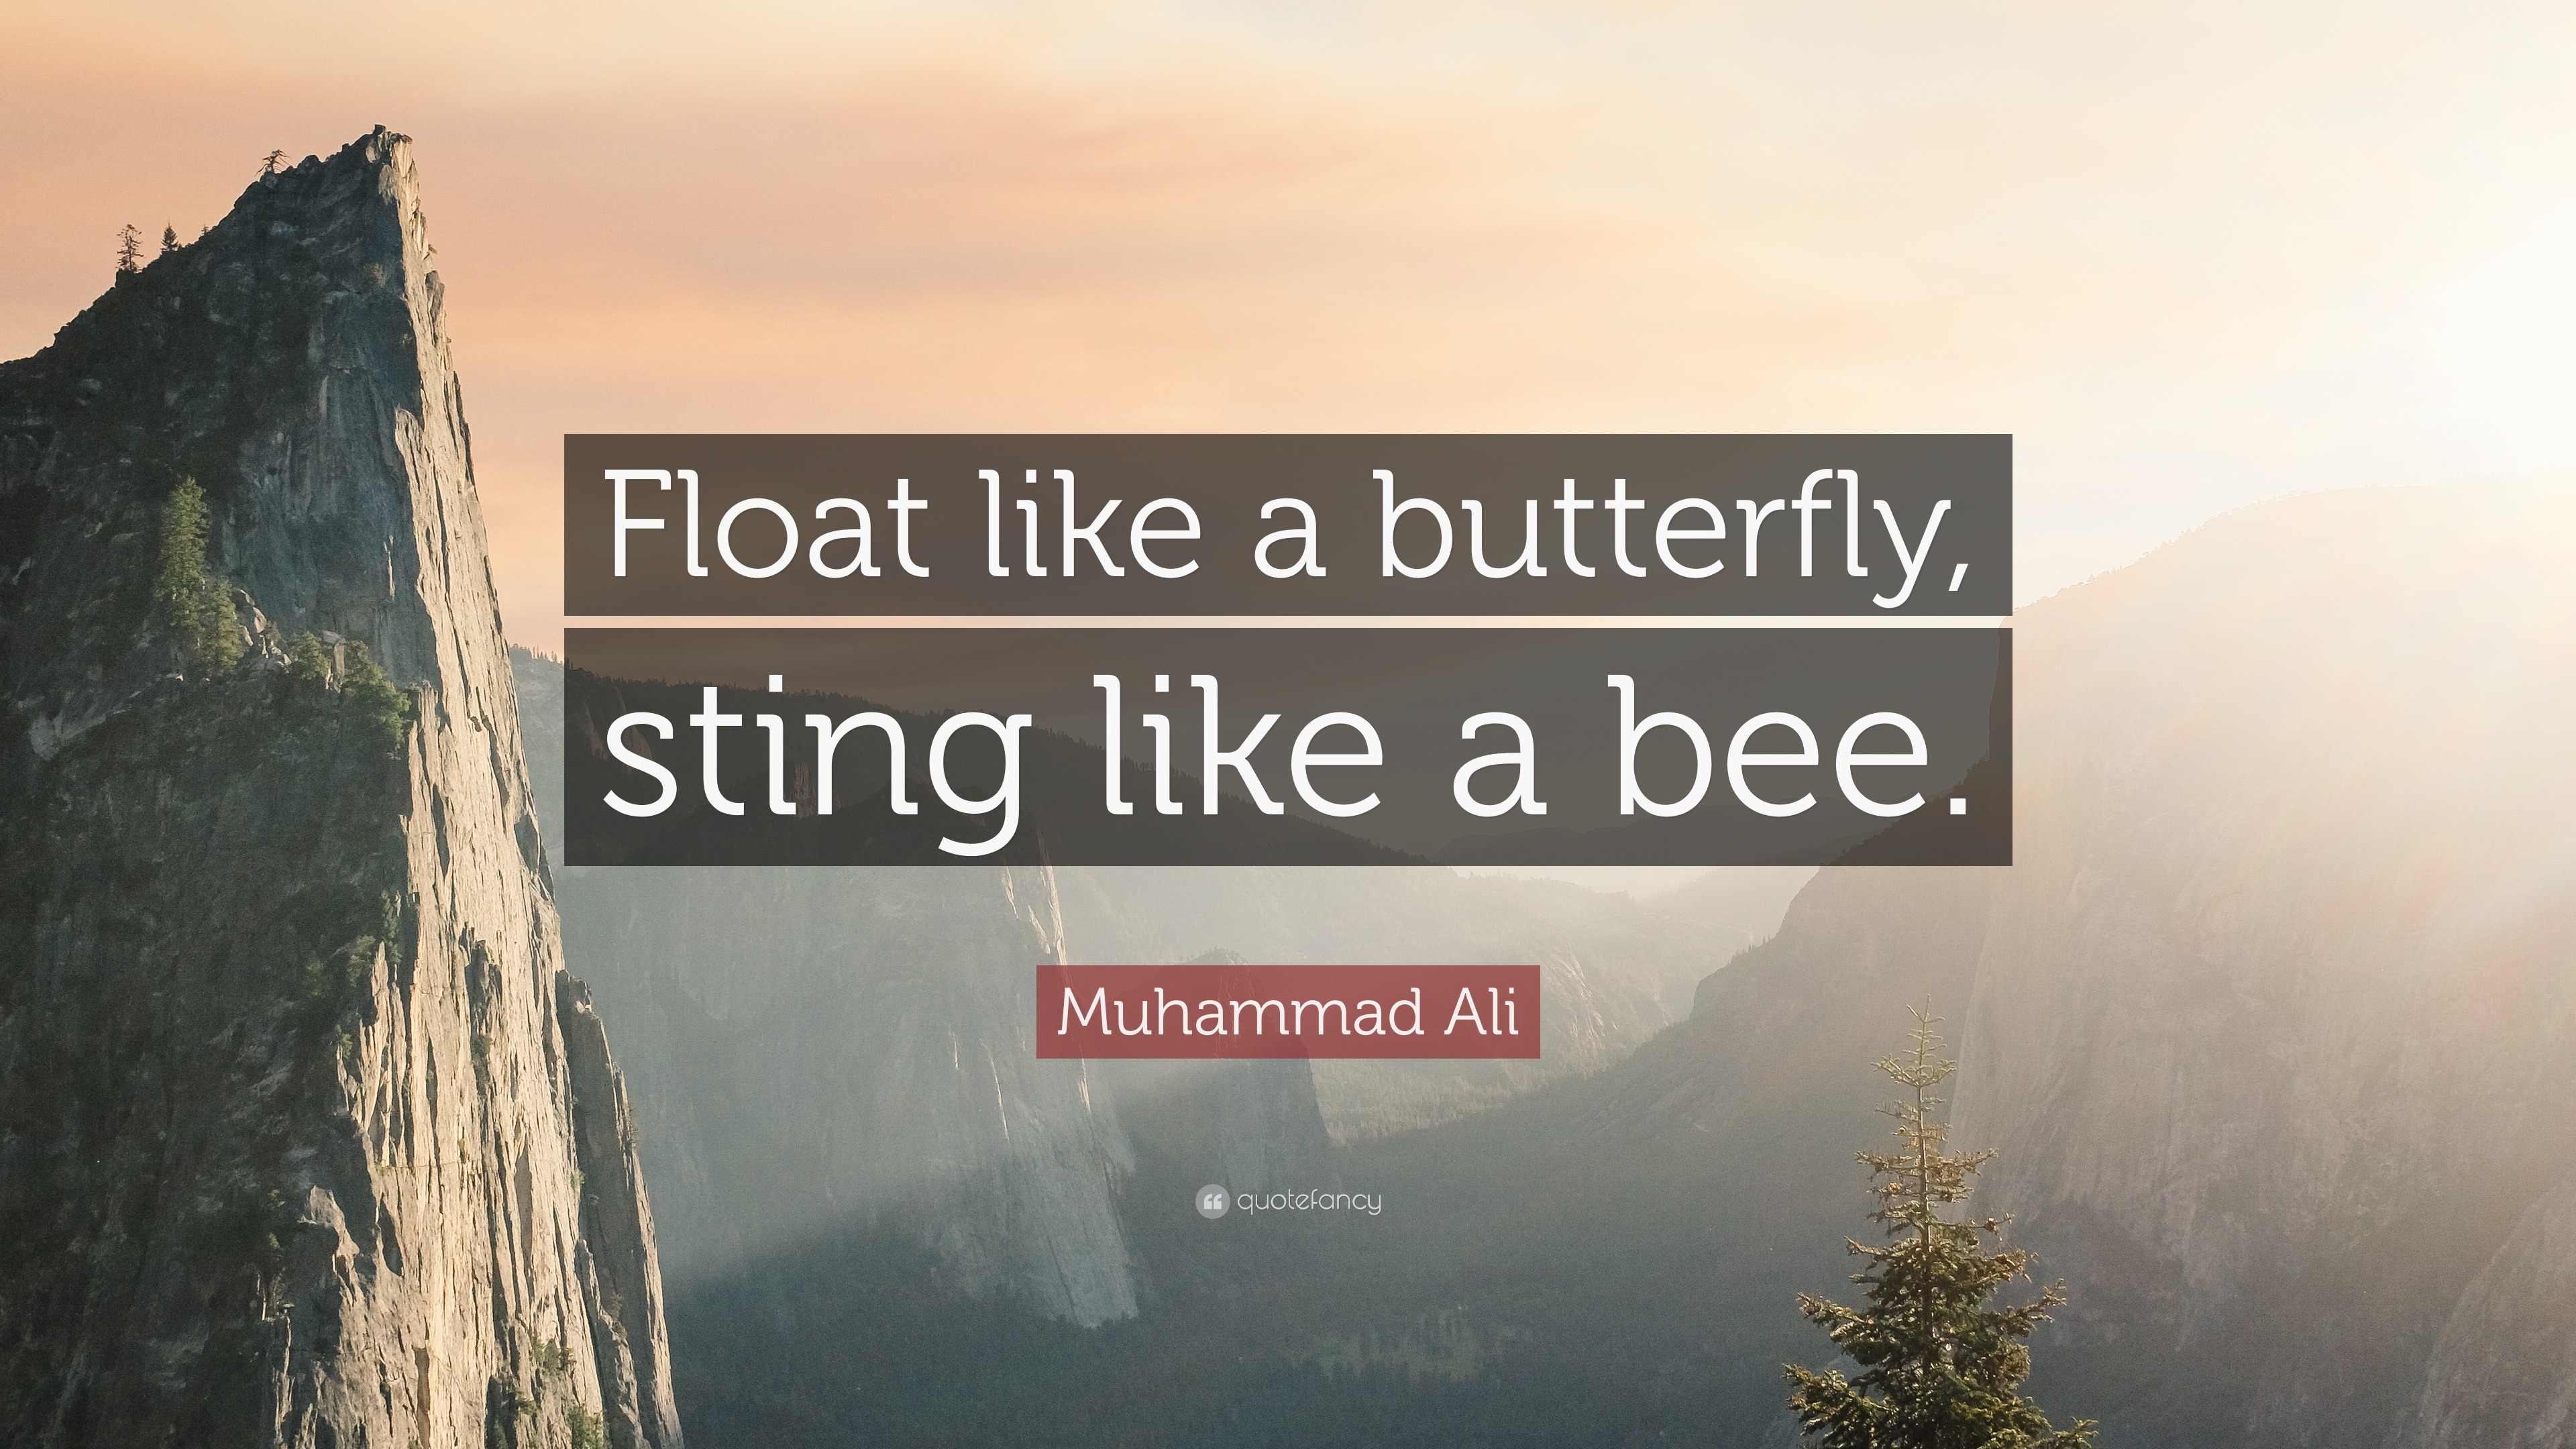 Muhammad Ali Quote: “Float like a butterfly, sting like a bee.”